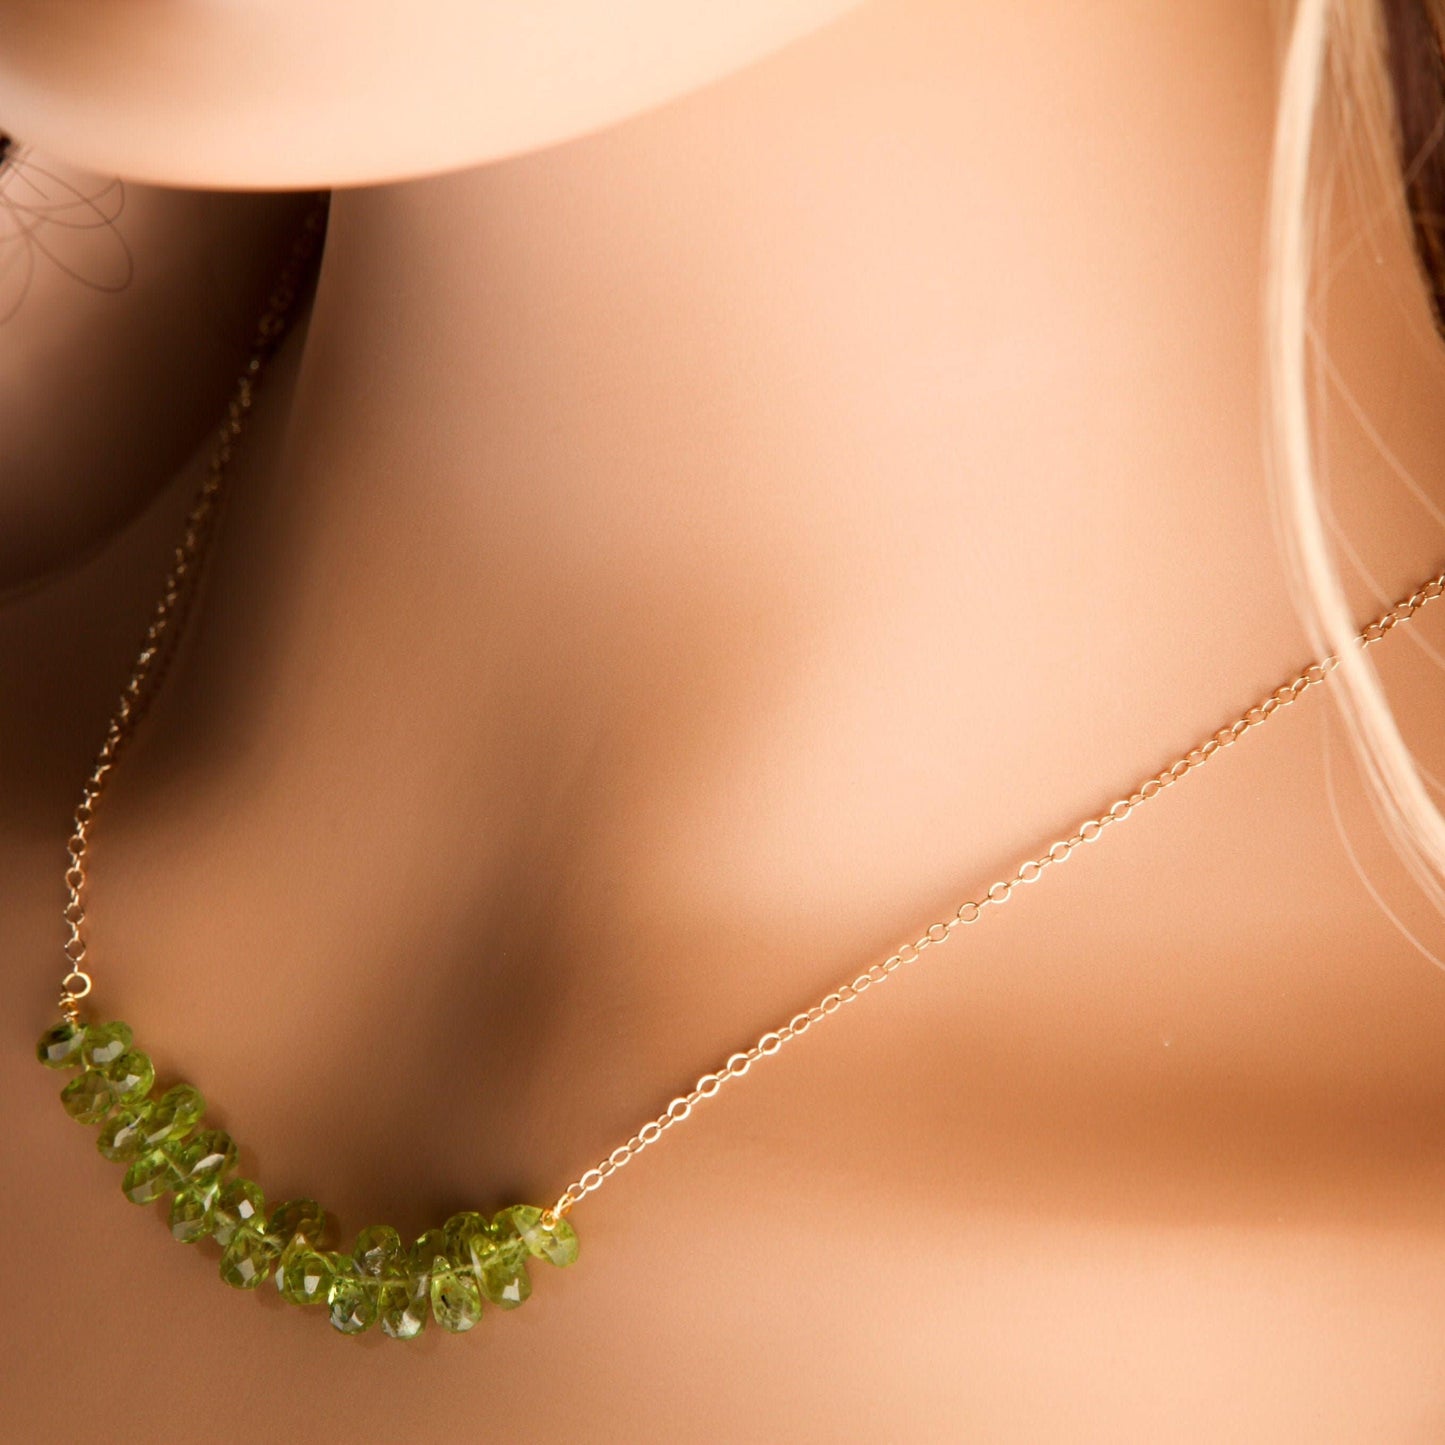 Natural Peridot Faceted Briolette 4x6-5x7mm Gemstone Drop Beads, 14K Gold Filled Chain and Clasp Choker Necklace